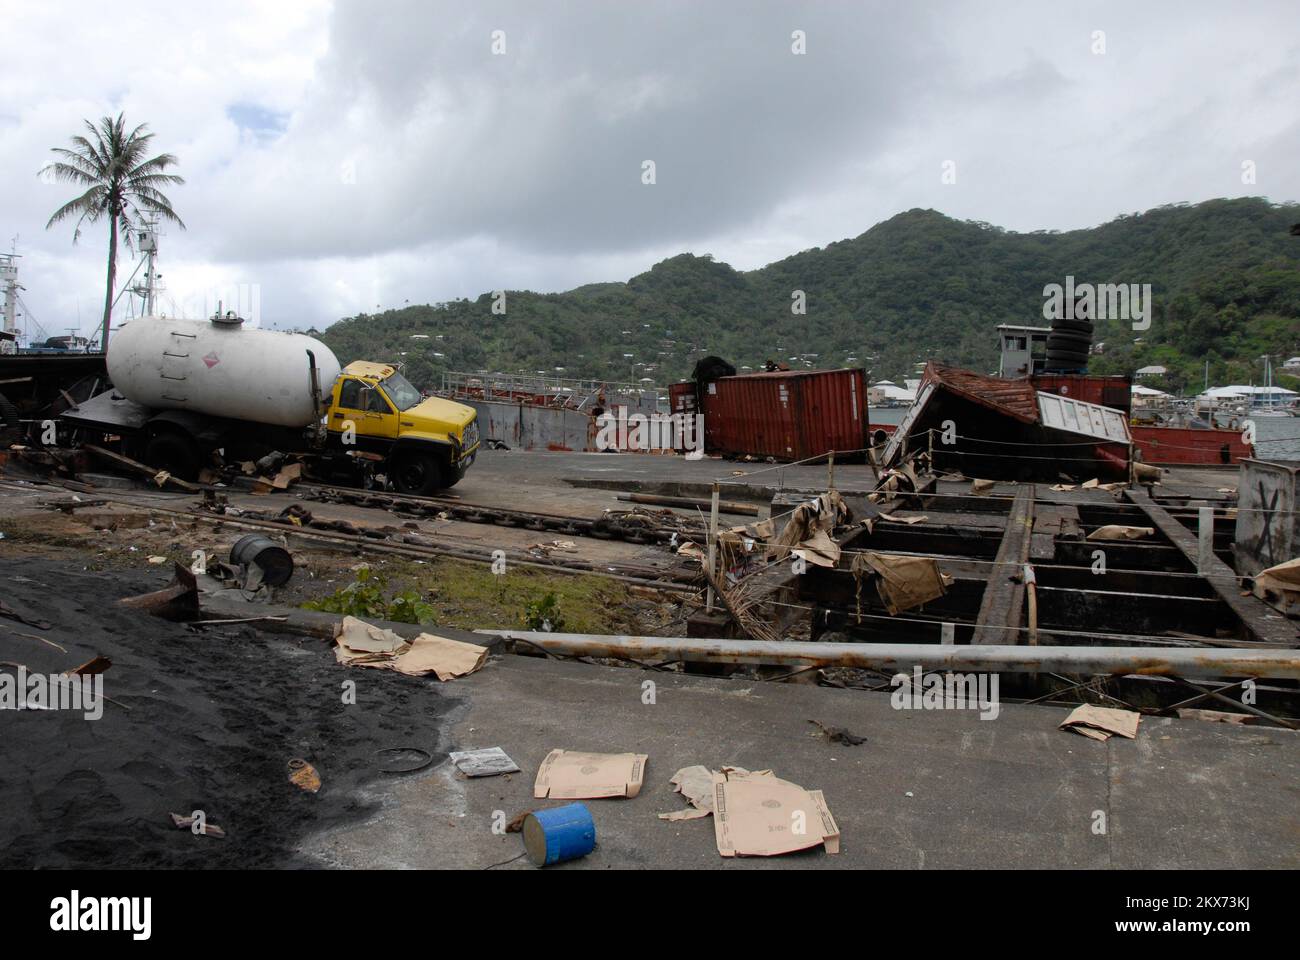 Earthquake   Tsunami - Pago Pago, American Samoa, October 1, 2009   The port in Pago Pago was damaged by the recent tsunami. This picture shows of the damage.  . American Samoa Earthquake, Tsunami, and Flooding. Photographs Relating to Disasters and Emergency Management Programs, Activities, and Officials Stock Photo